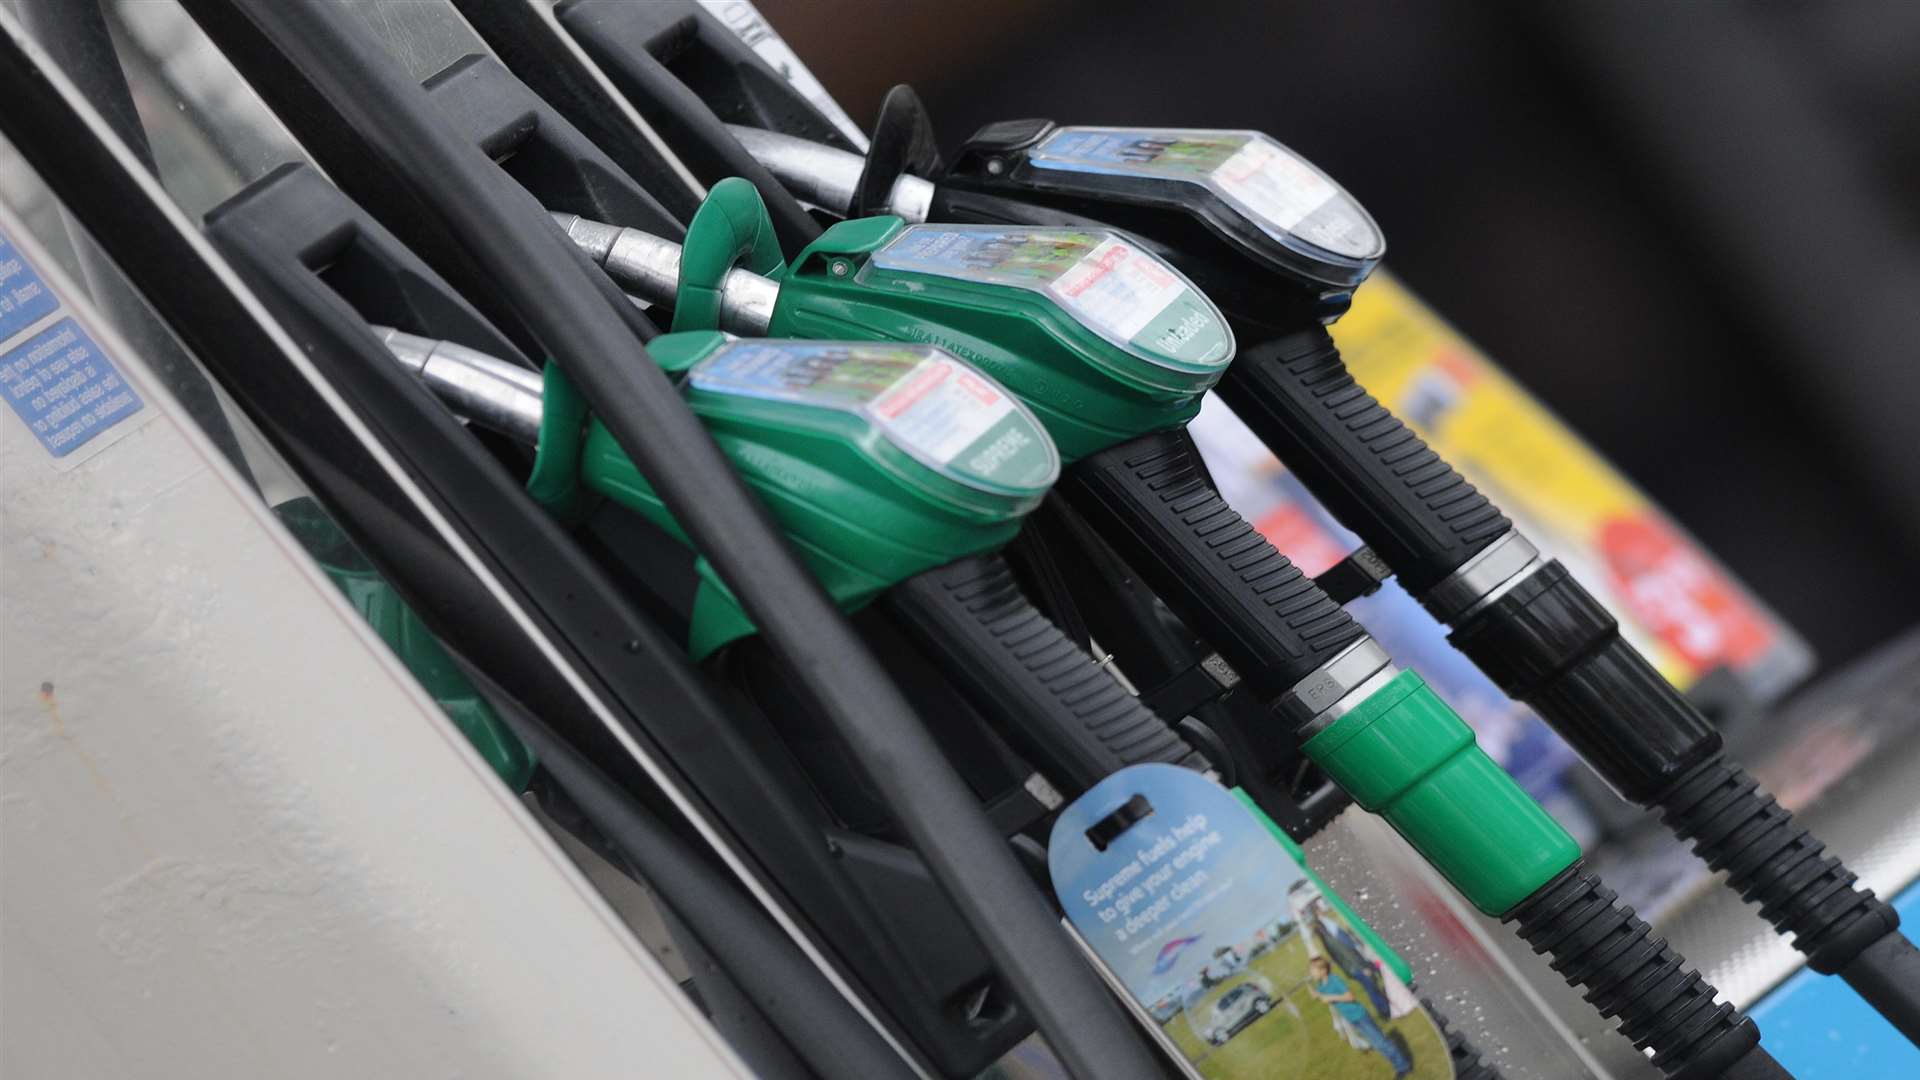 UK motorists pay the highest prices for petrol and diesel in the world